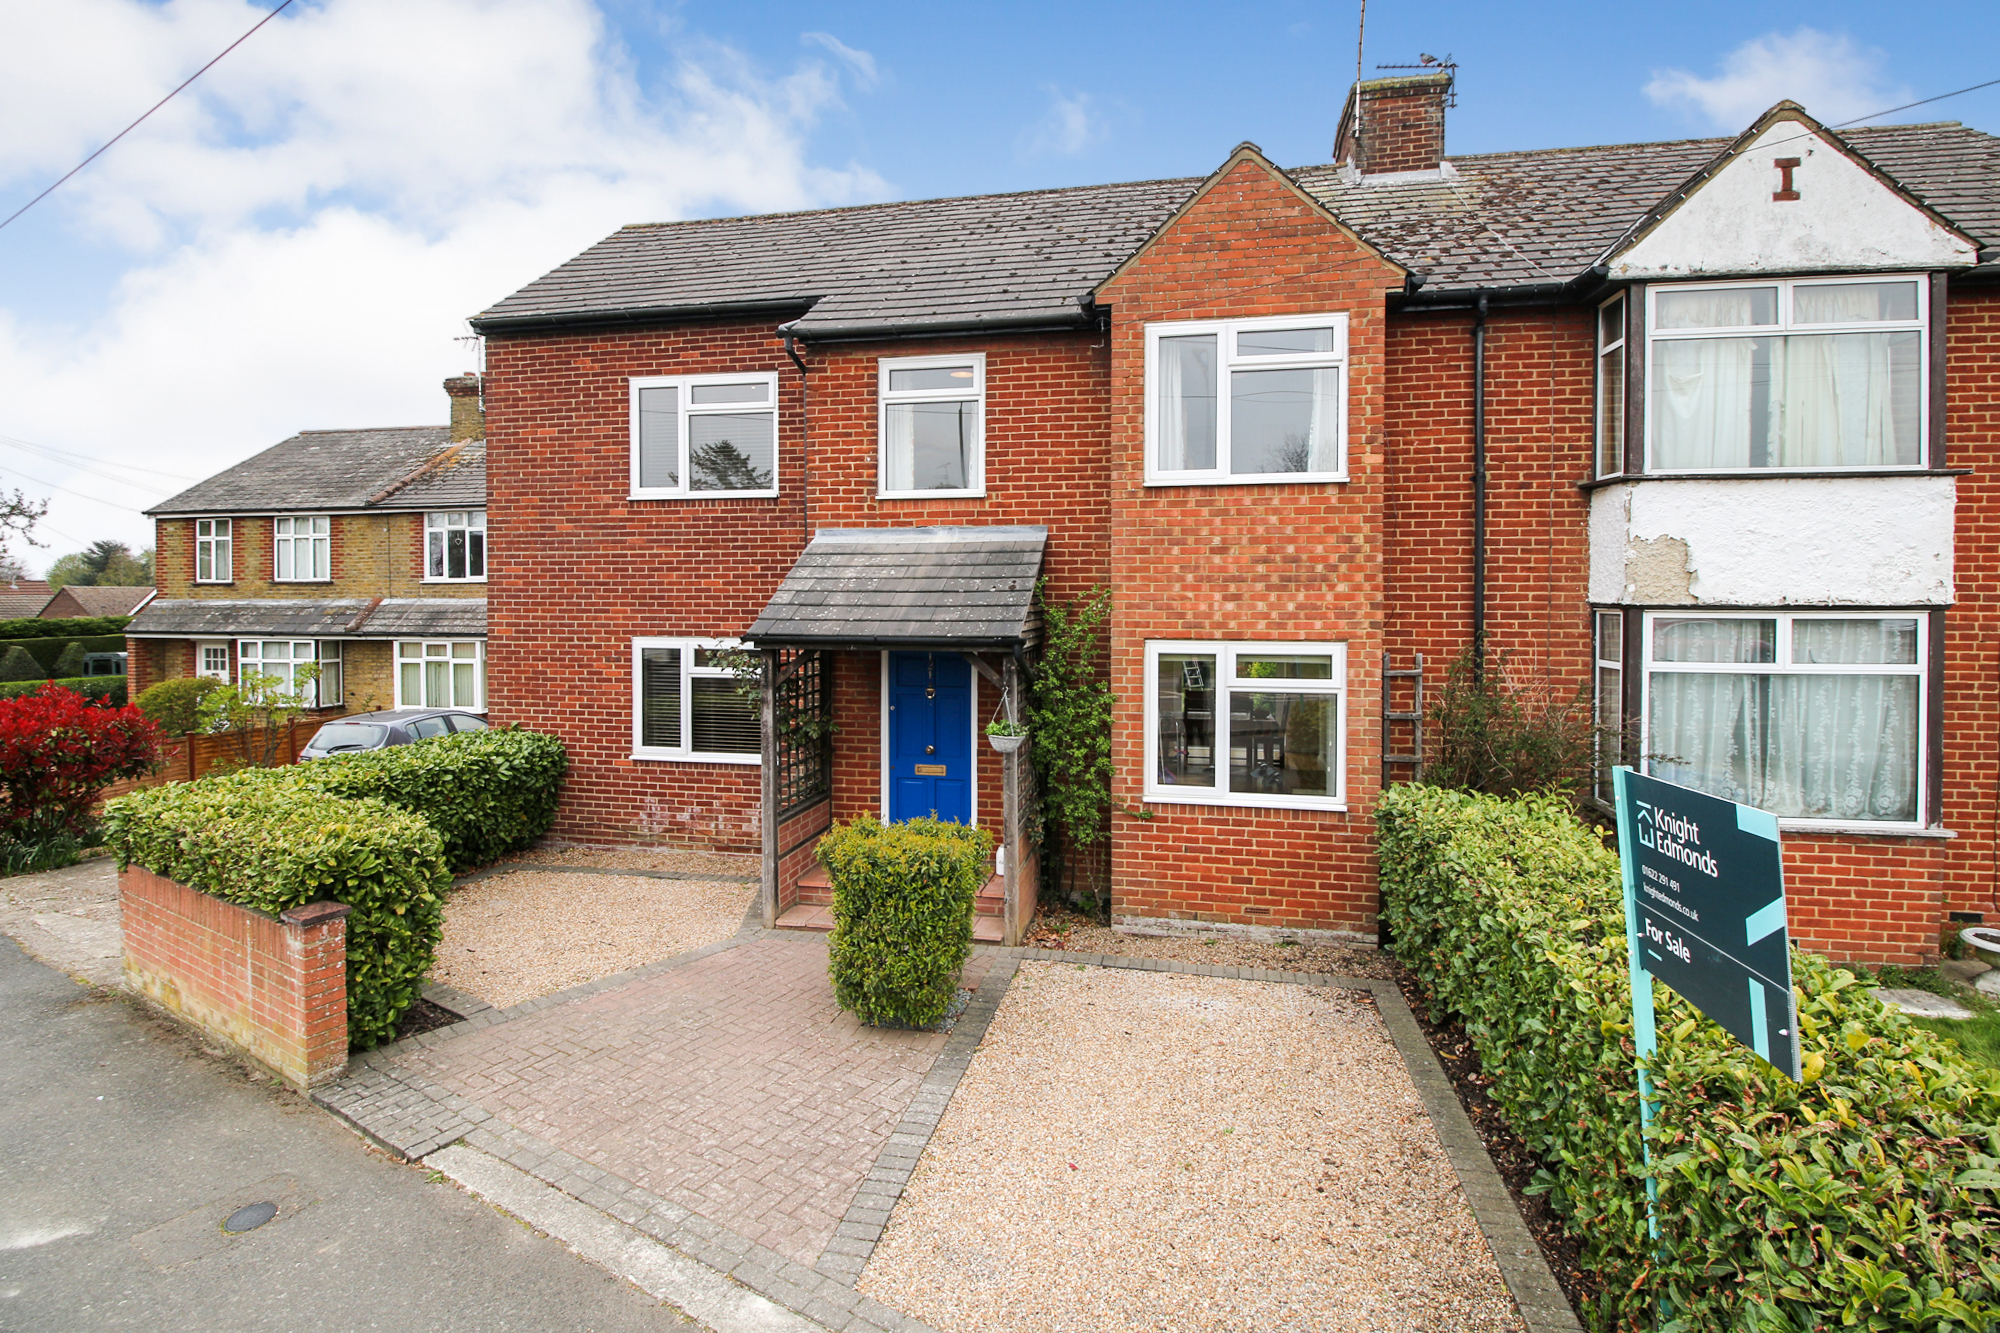 Sold In Your Area; Linton Road, Maidstone